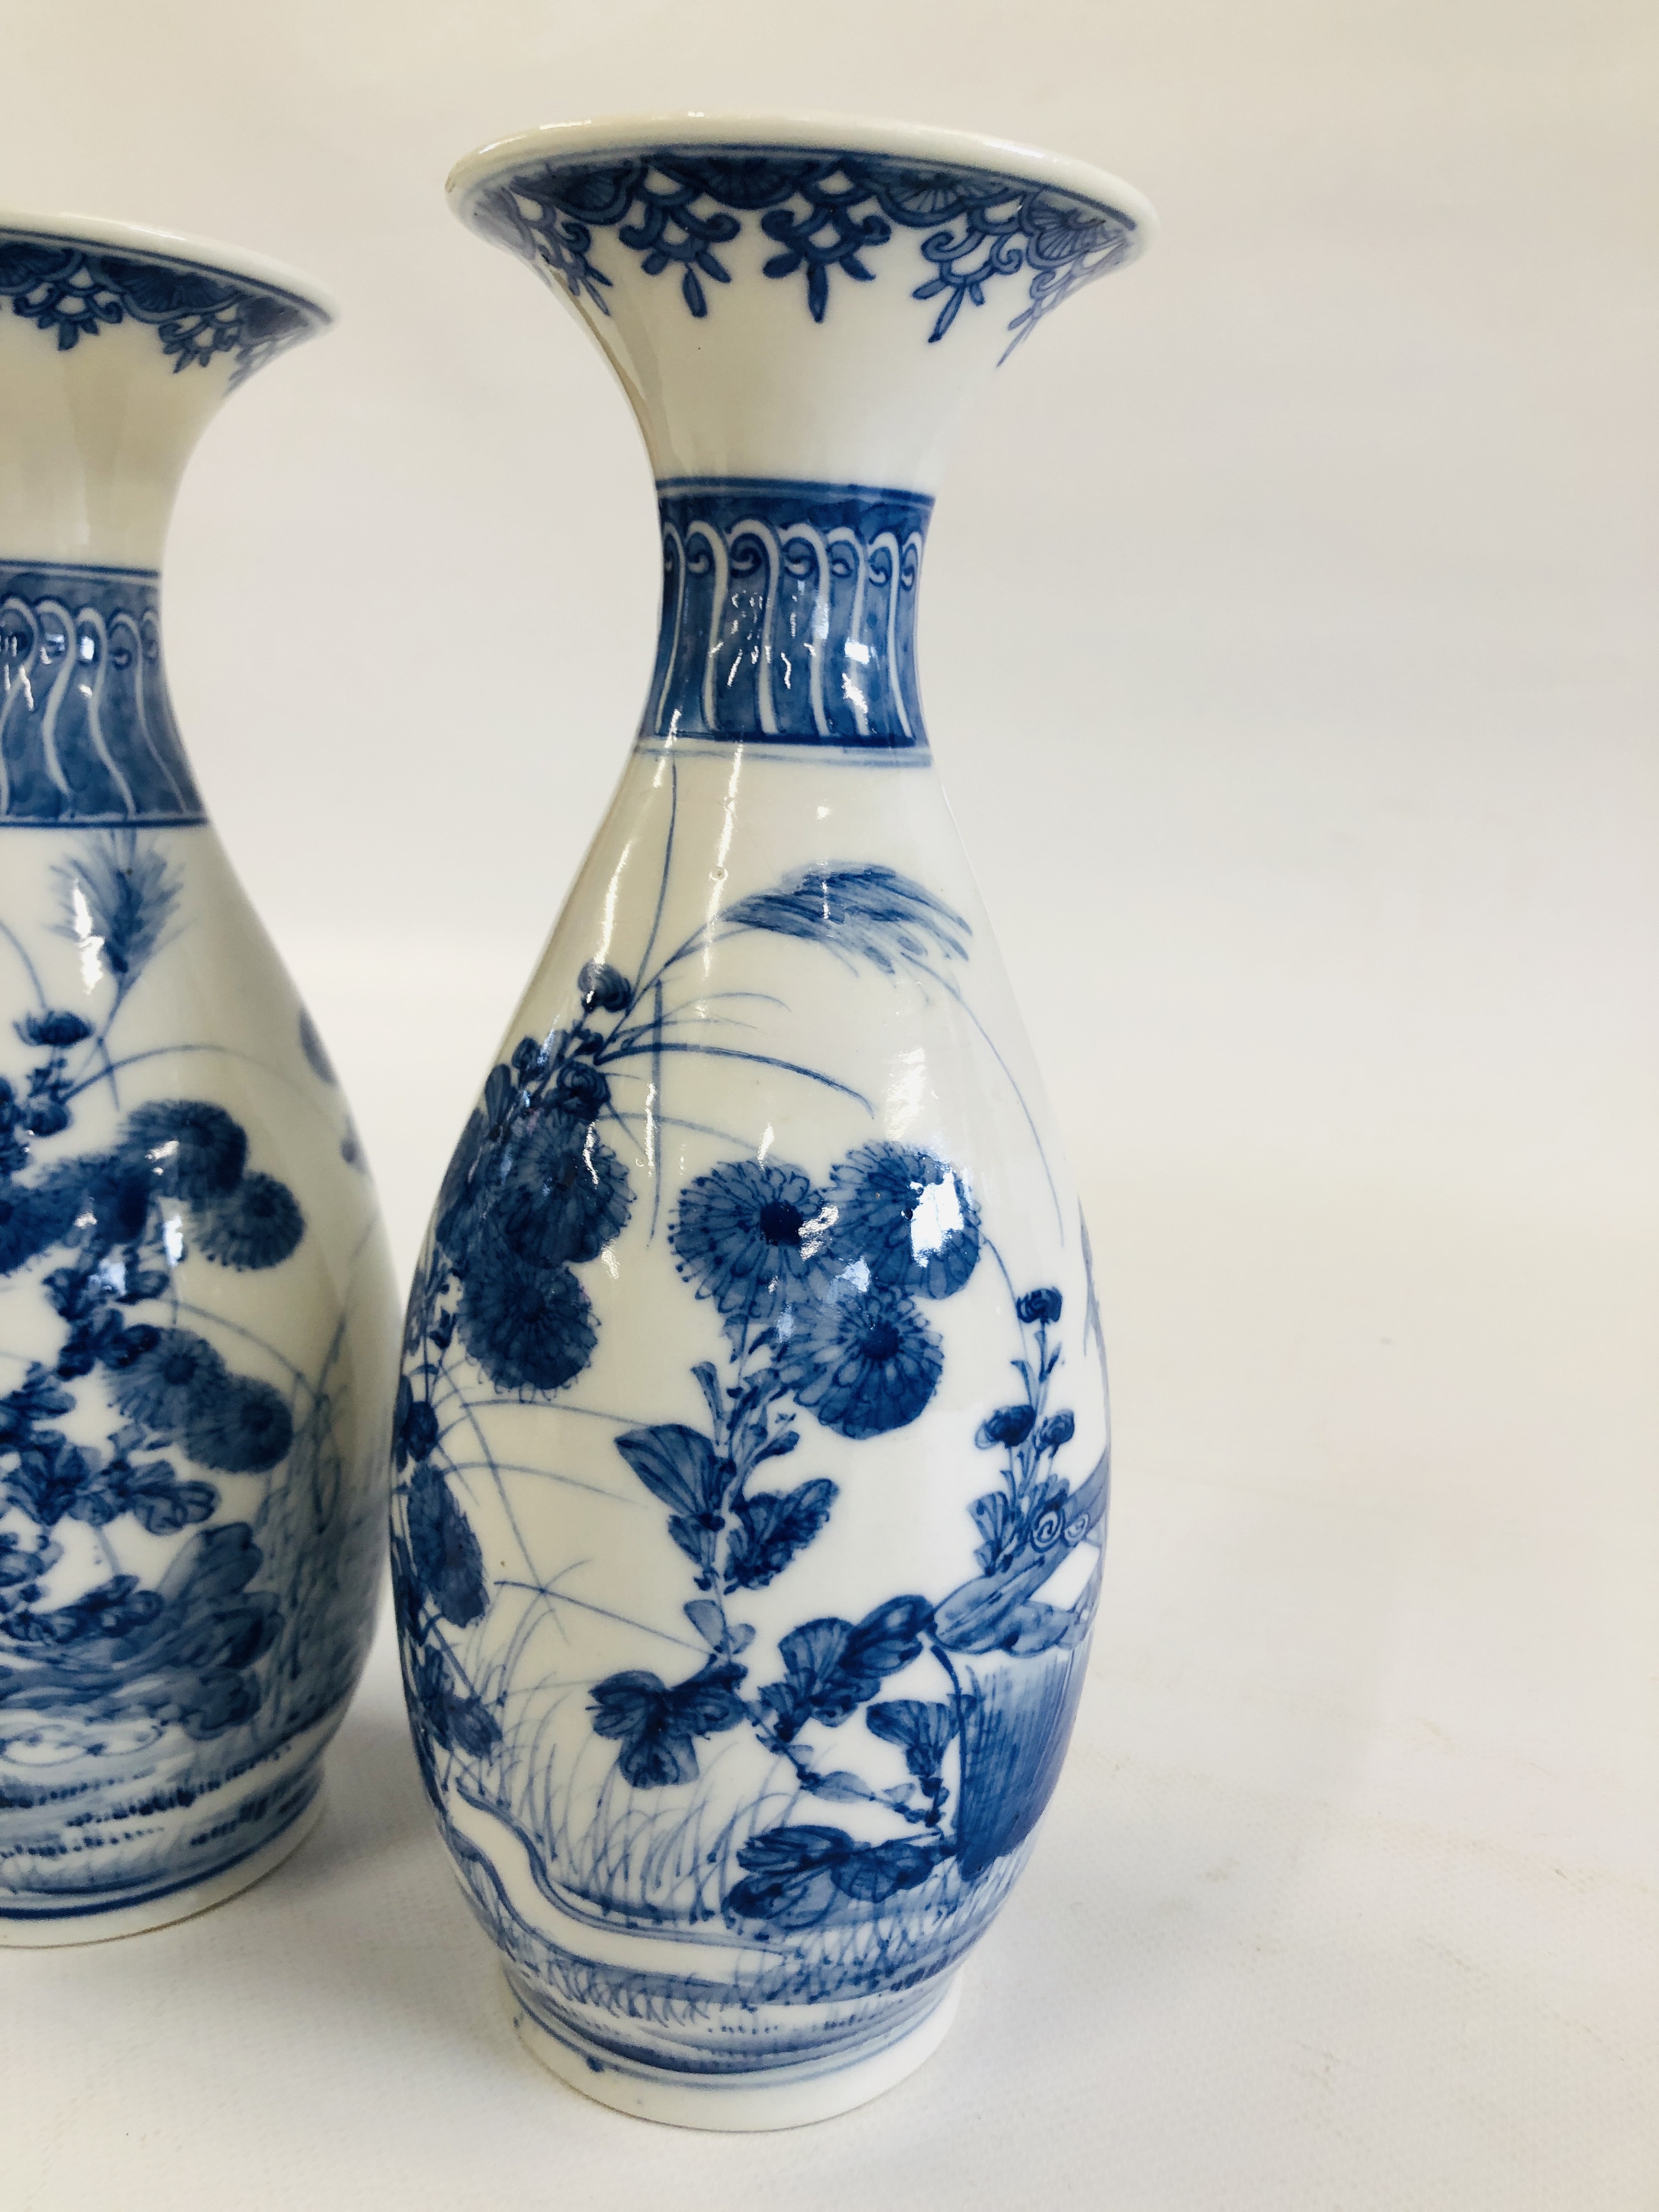 A PAIR OF DECORATIVE BLUE AND WHITE ORIENTAL VASES DEPICTING A PREGNANT WOMAN SEATED AMONGST THE - Image 3 of 13